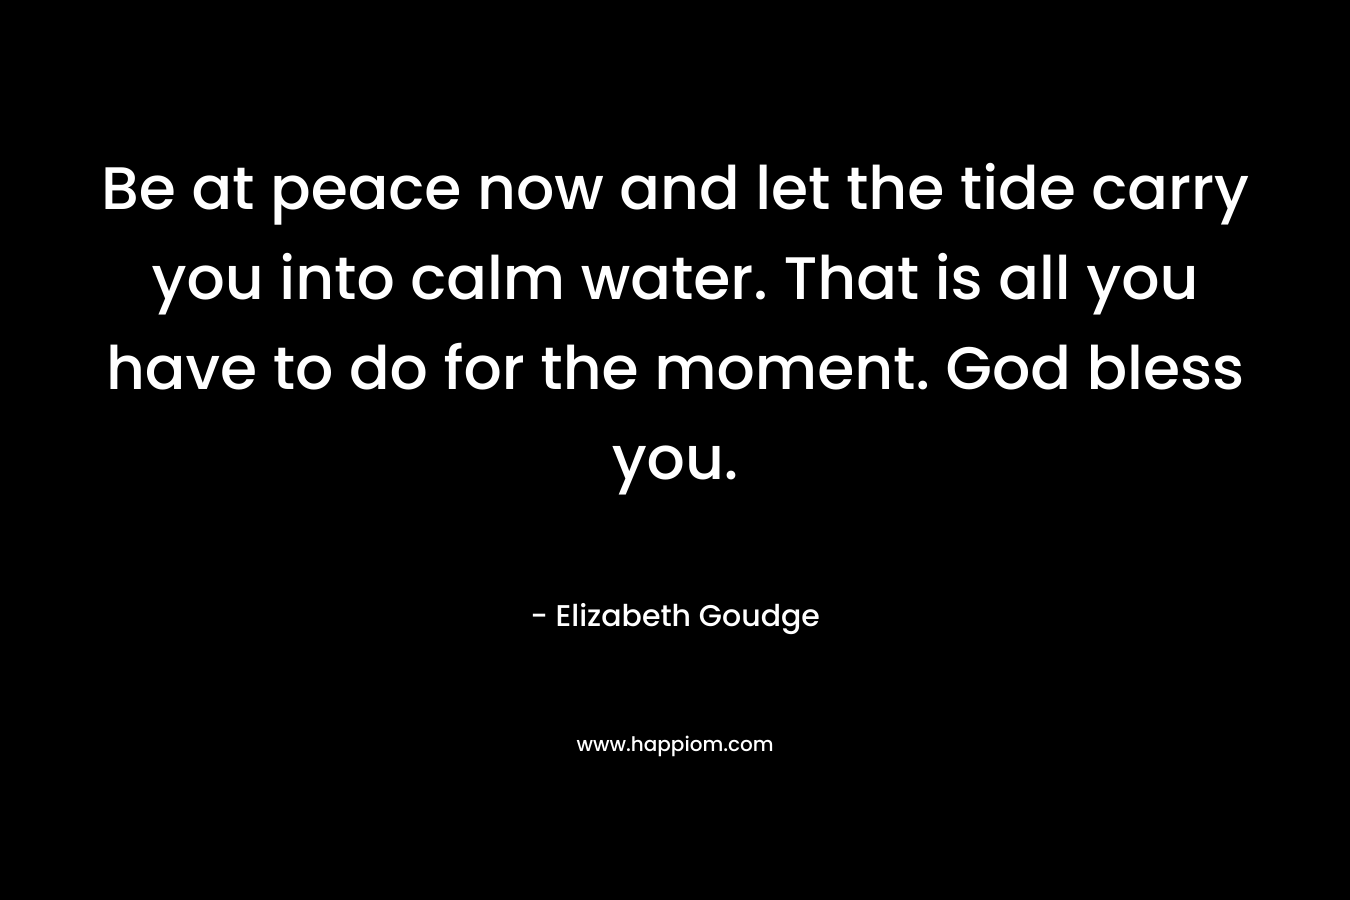 Be at peace now and let the tide carry you into calm water. That is all you have to do for the moment. God bless you.